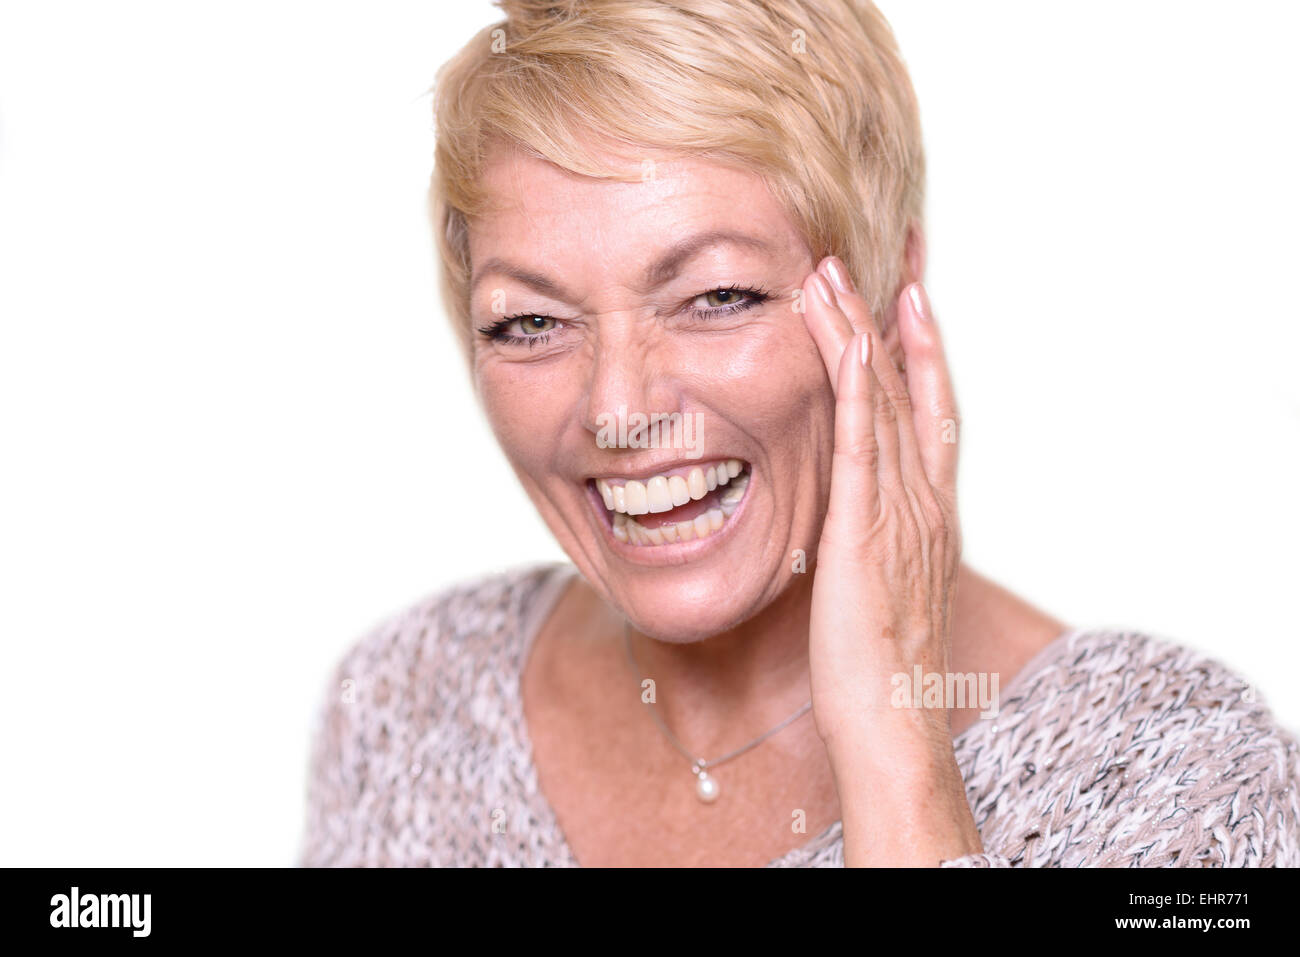 Close up Happy Middle Age Woman, with Short Blond Hair, Laughing While Touching her Face and Looking at the Camera. Stock Photo